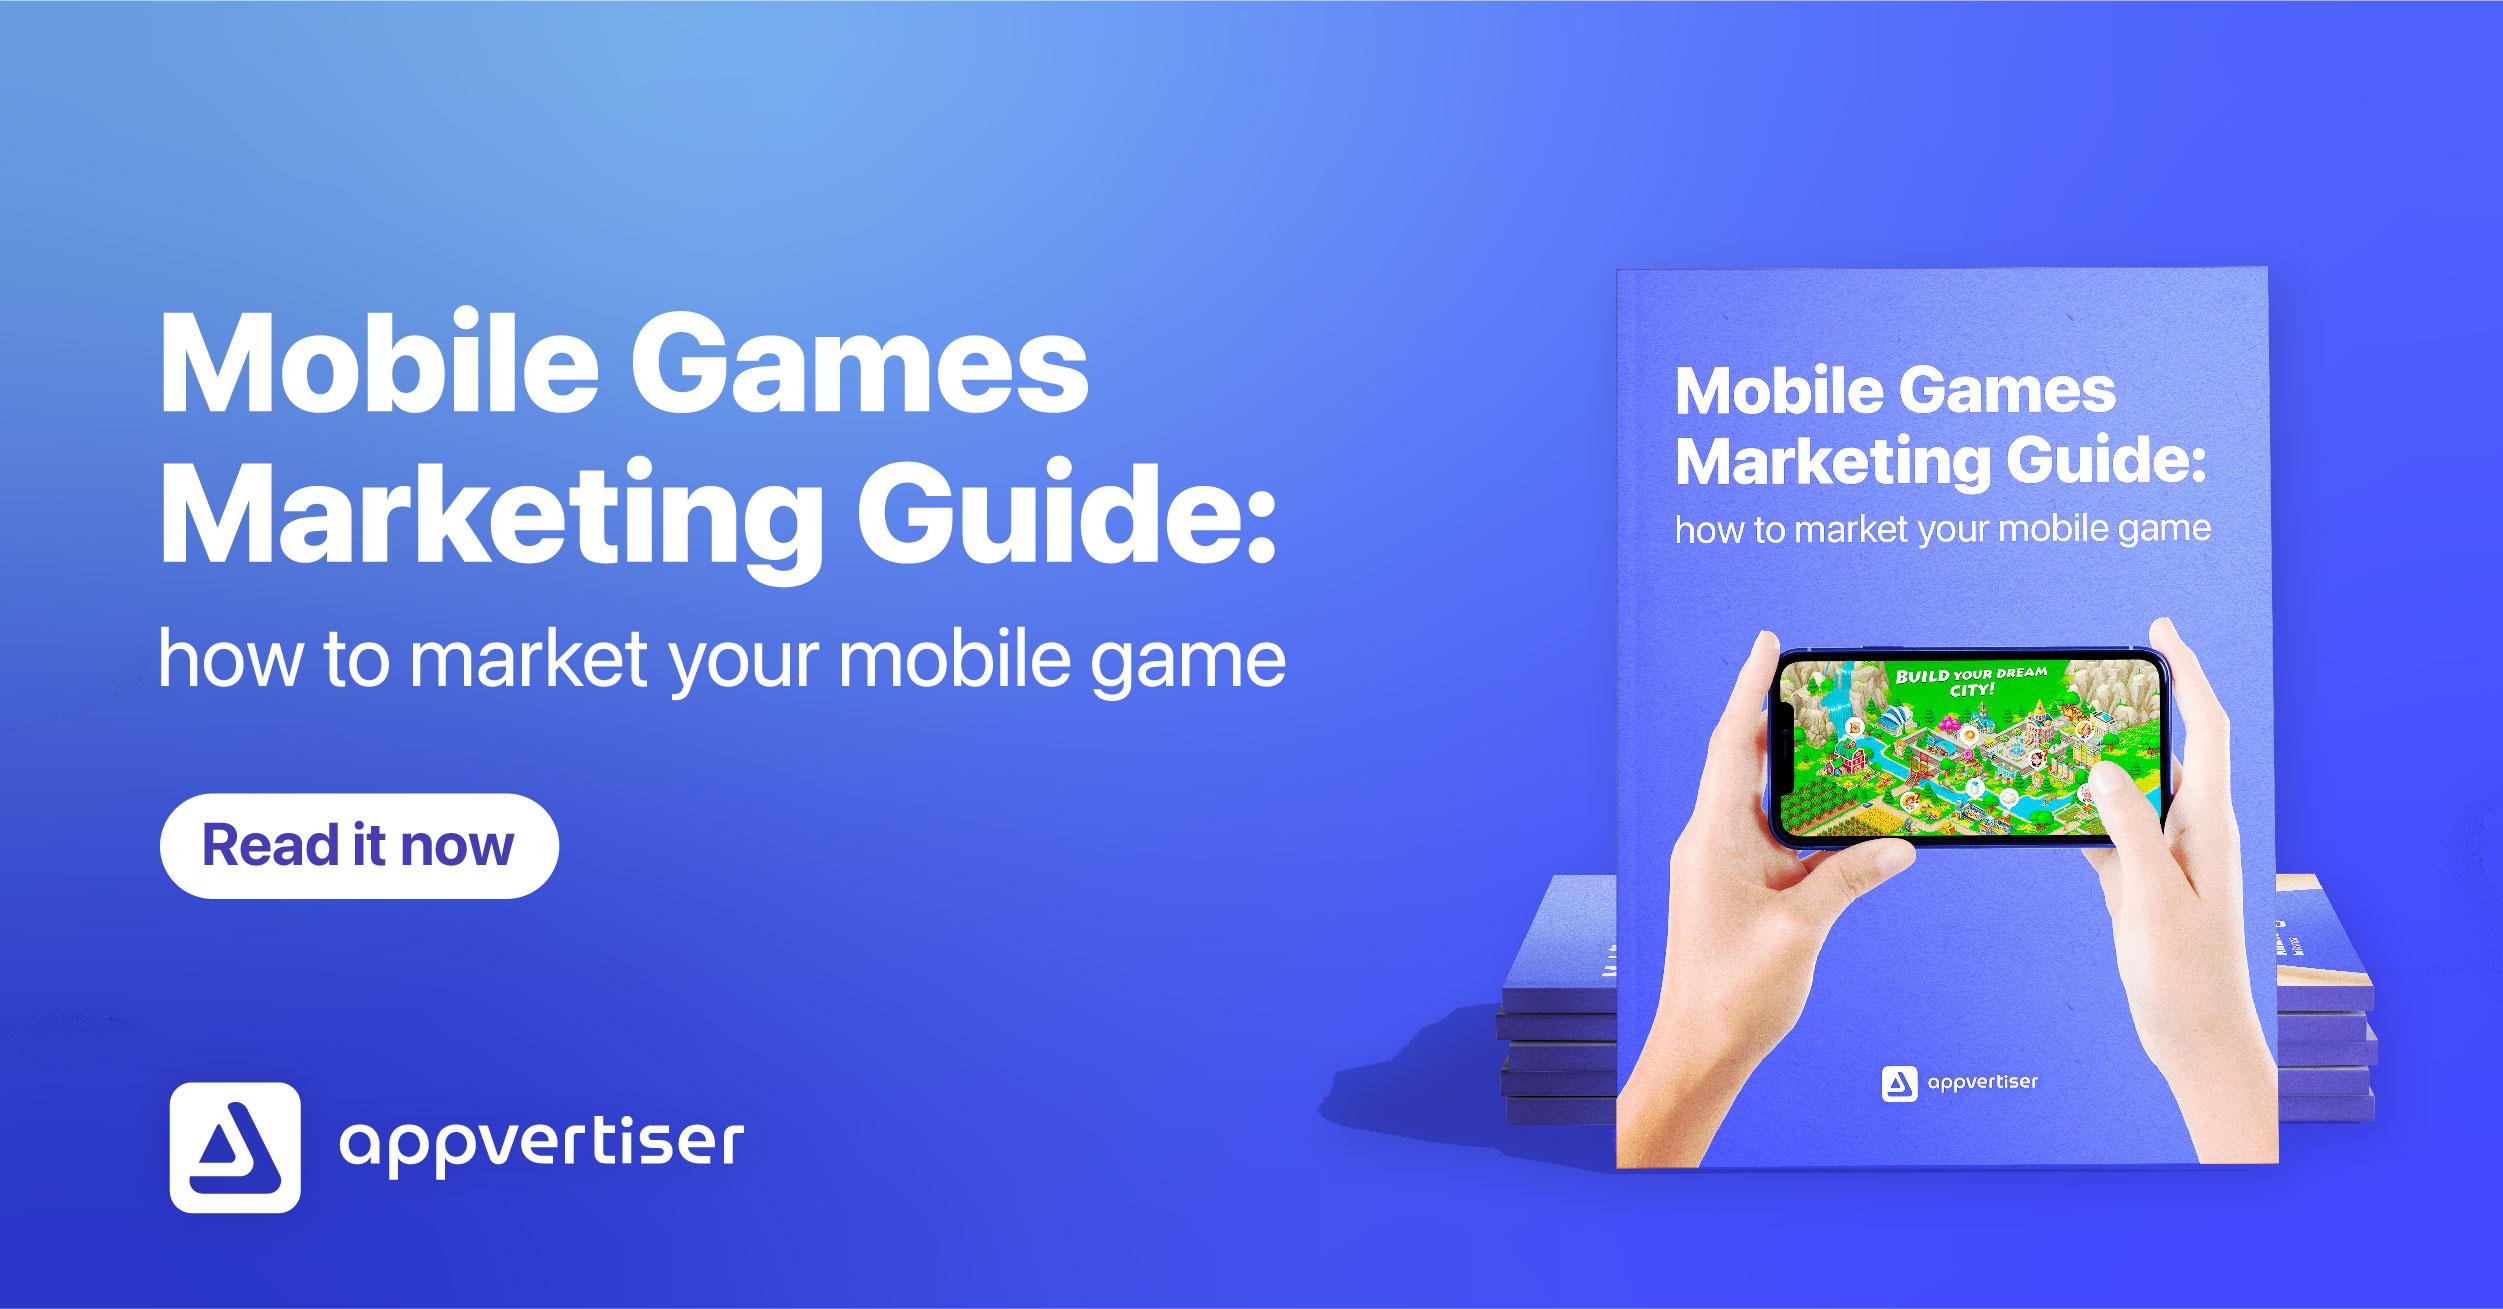 How to market your mobile game